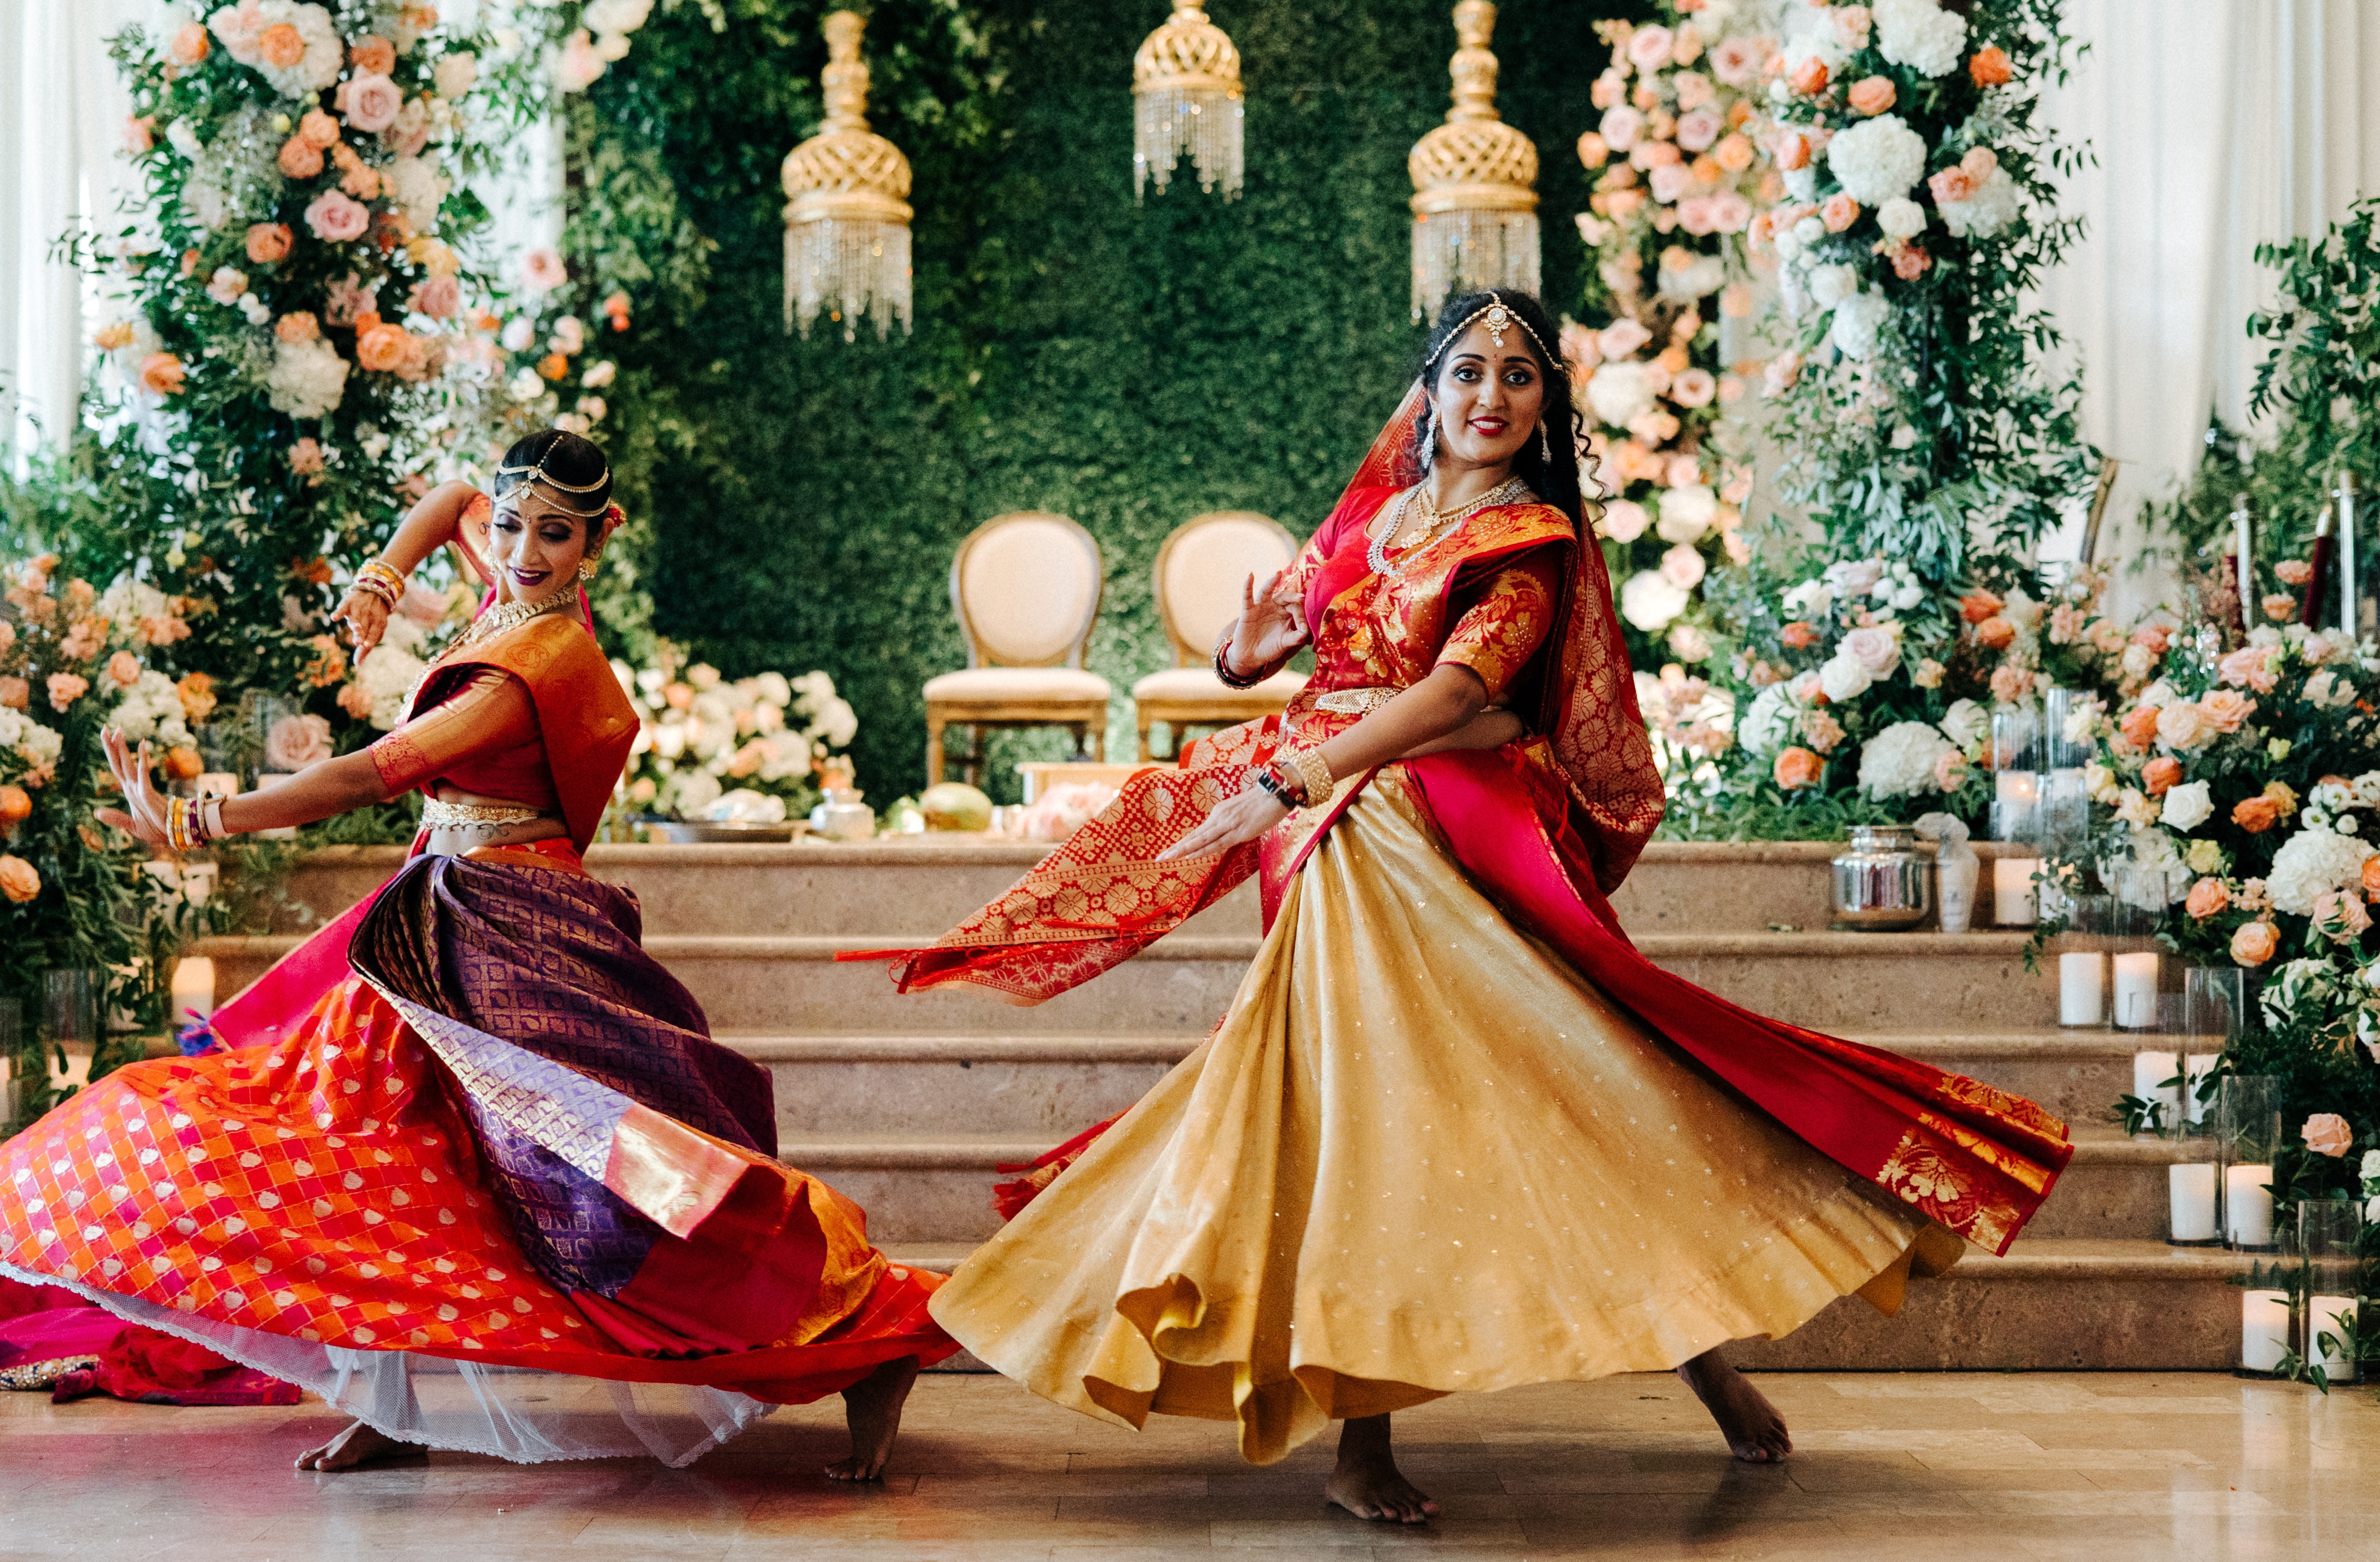 Wedding guests dance in traditional Indian wedding attire on the dancefloor at the wedding venue, The Corinthian.